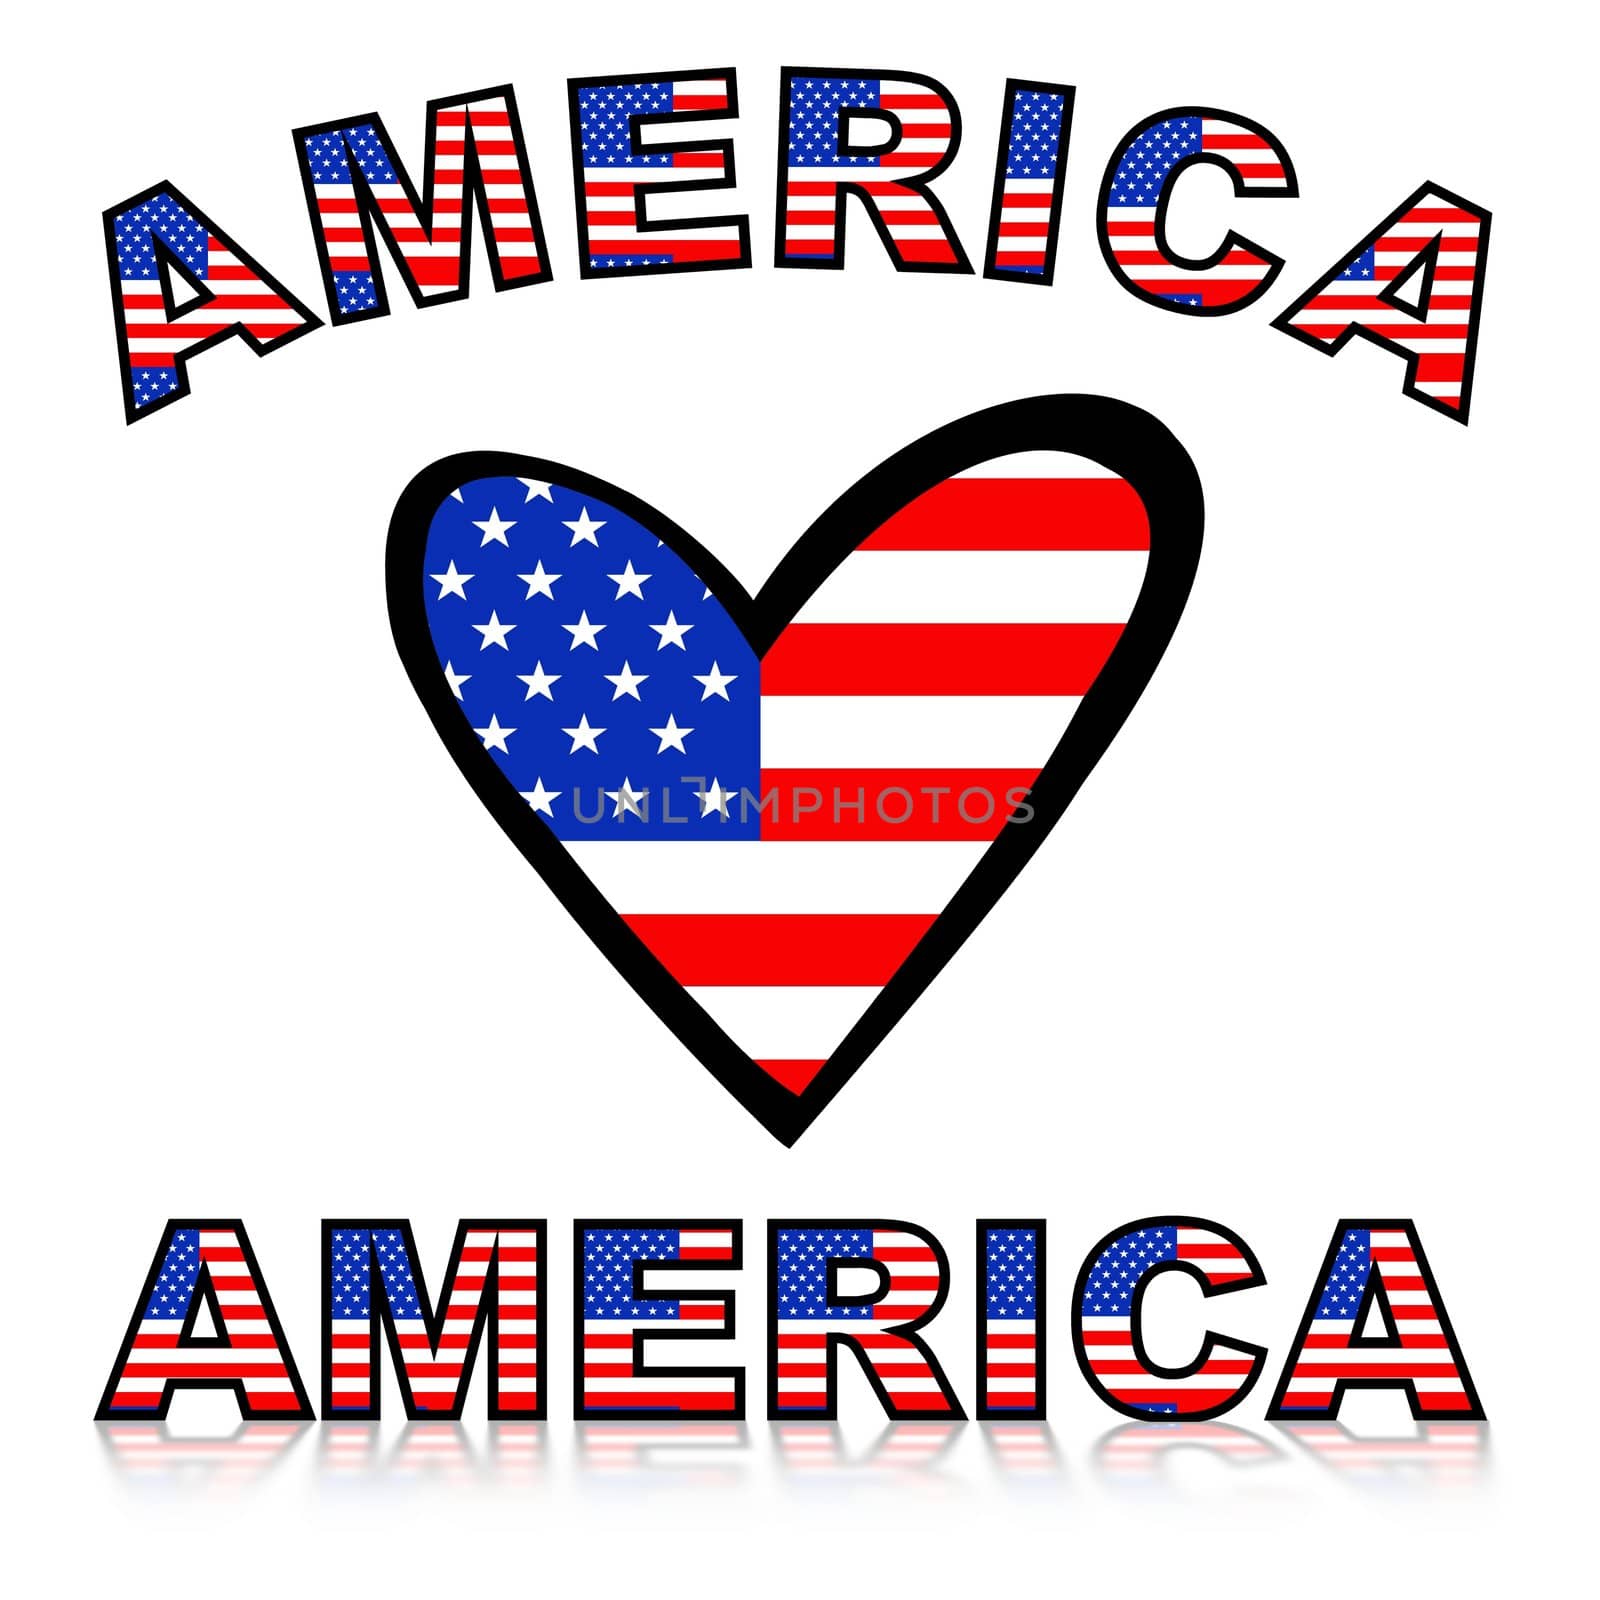 Illustration of a heart with United states of America flag texture and text